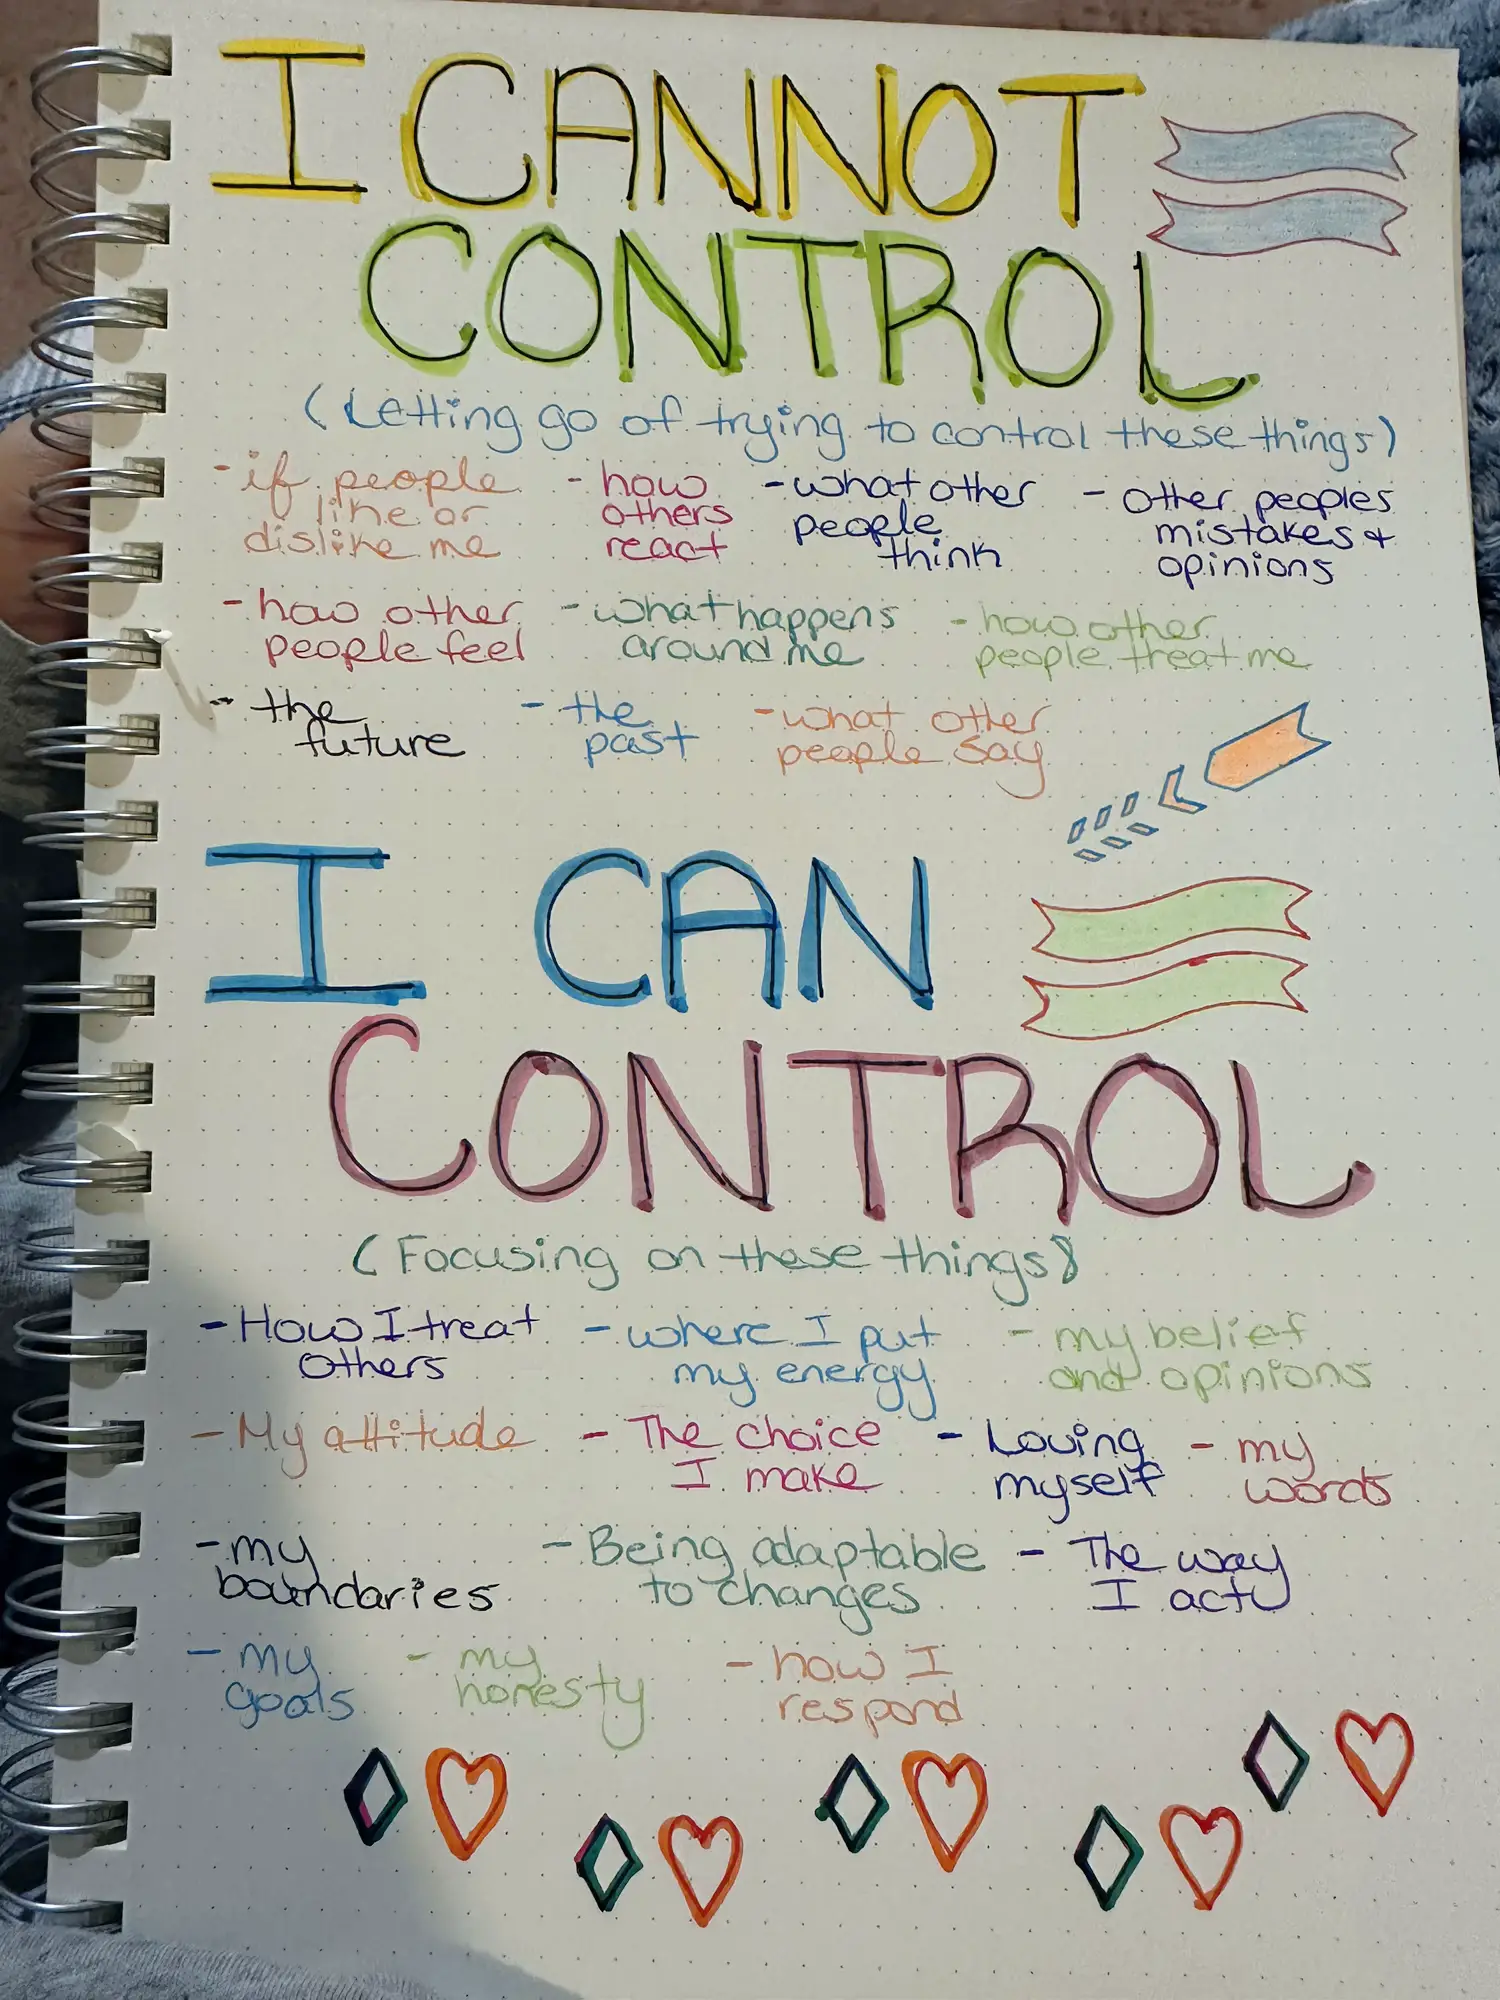  A list of things to focus on and not control.